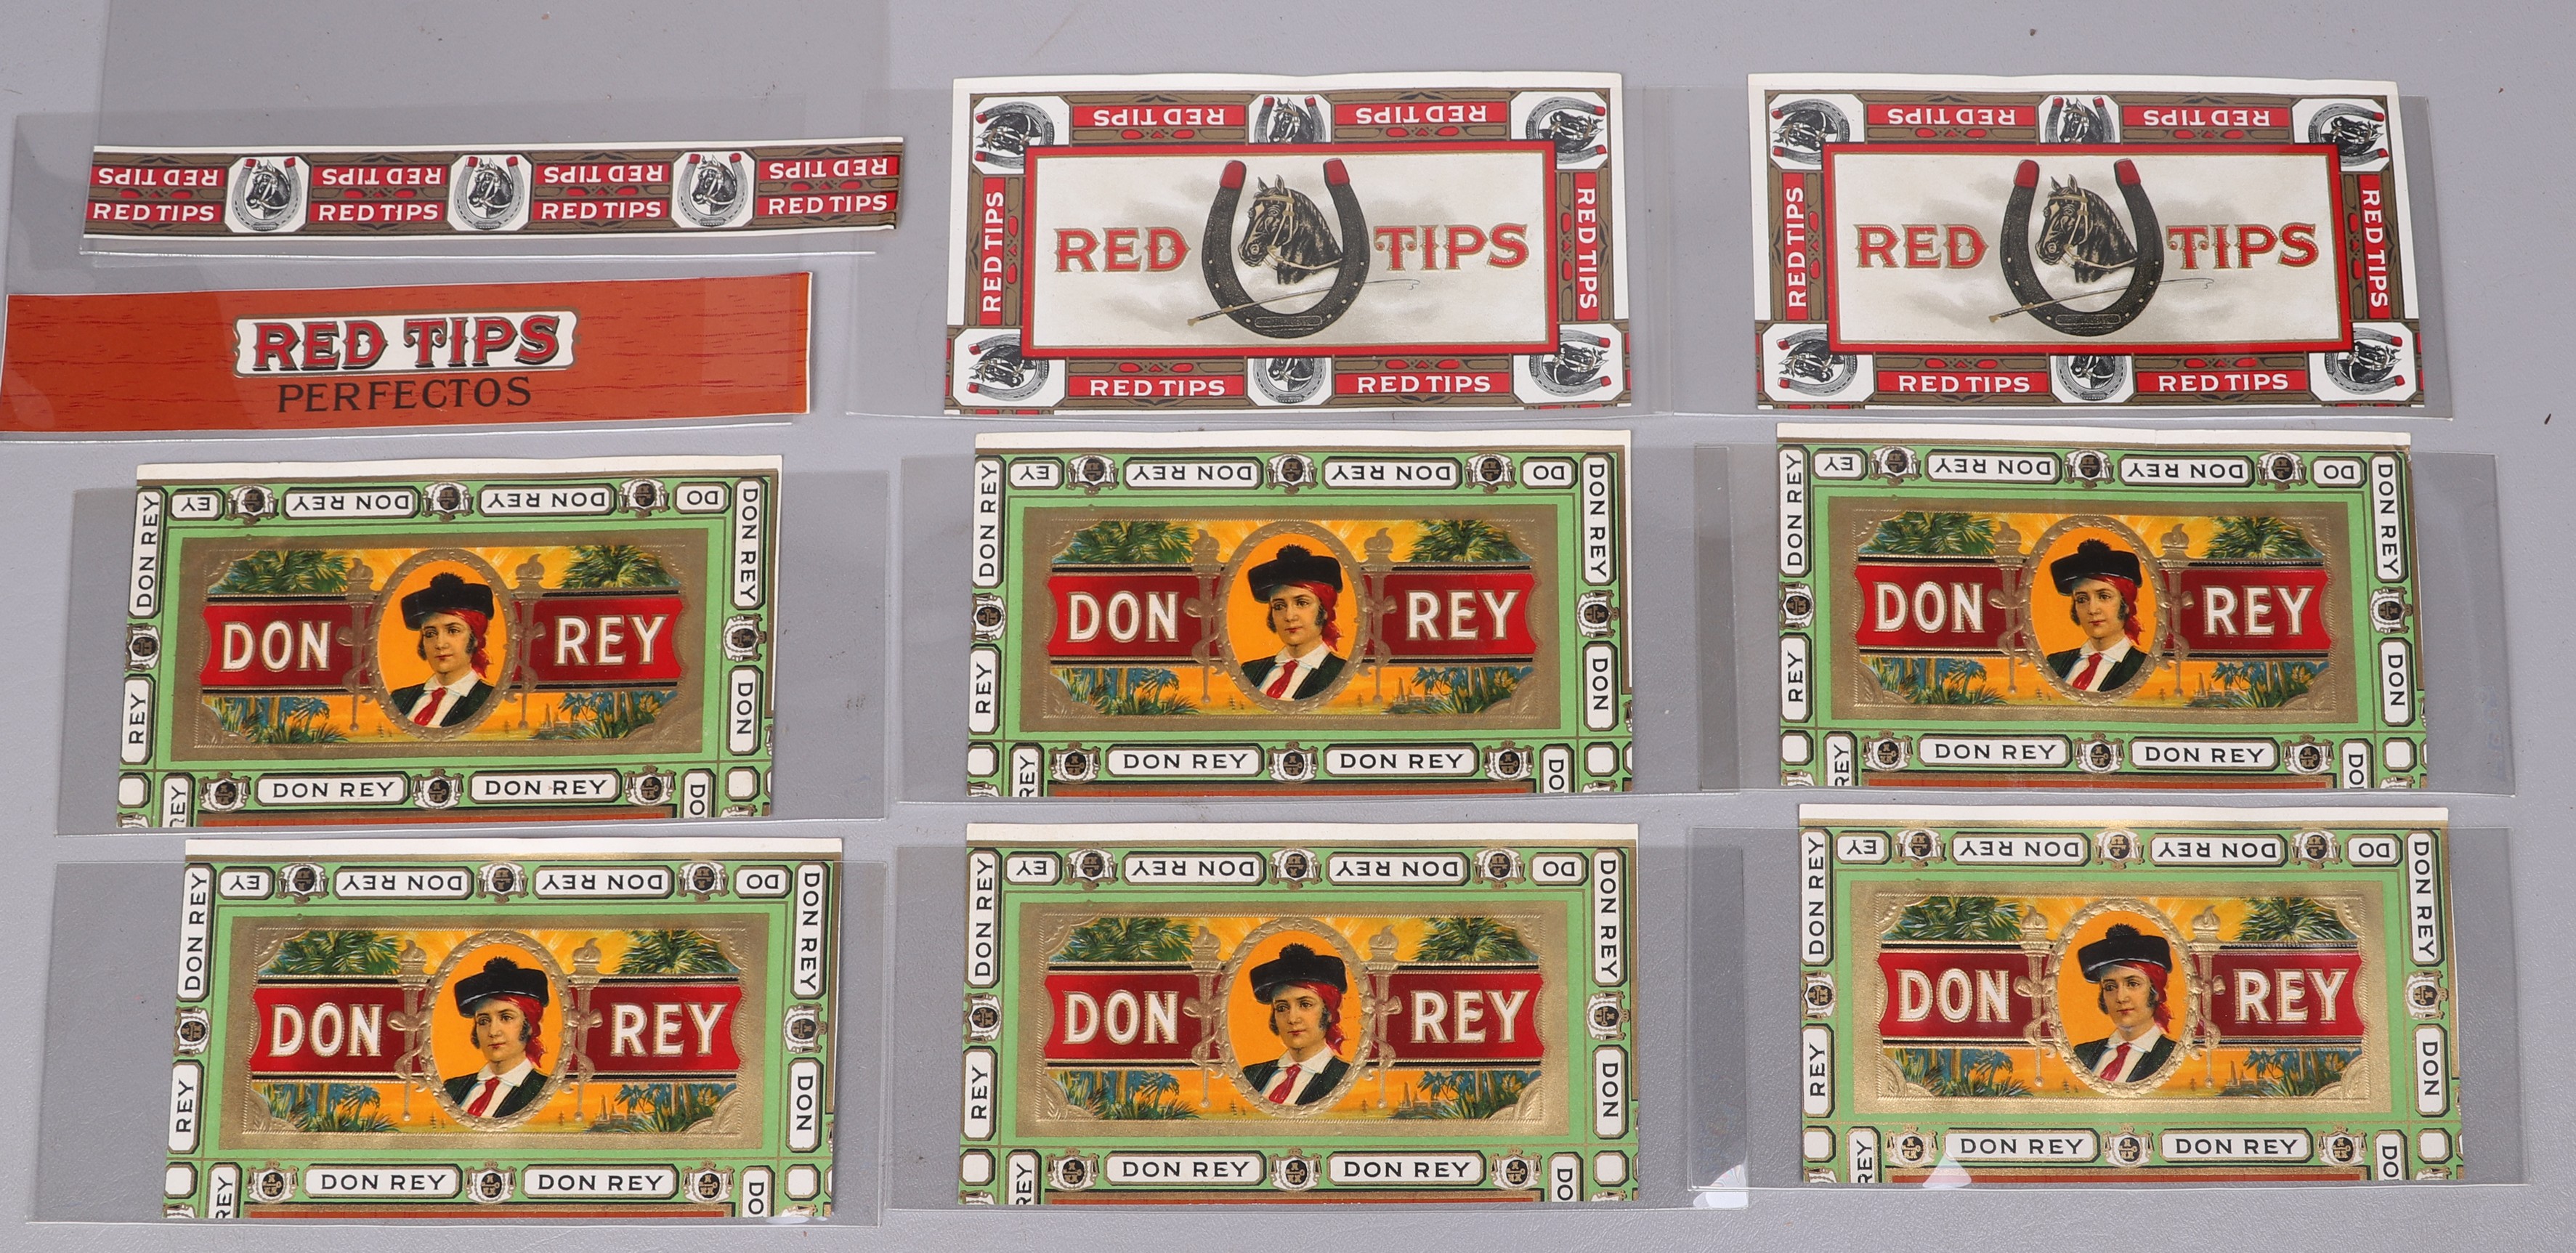 (6) "Don Rey" & (4) "Red Tips"